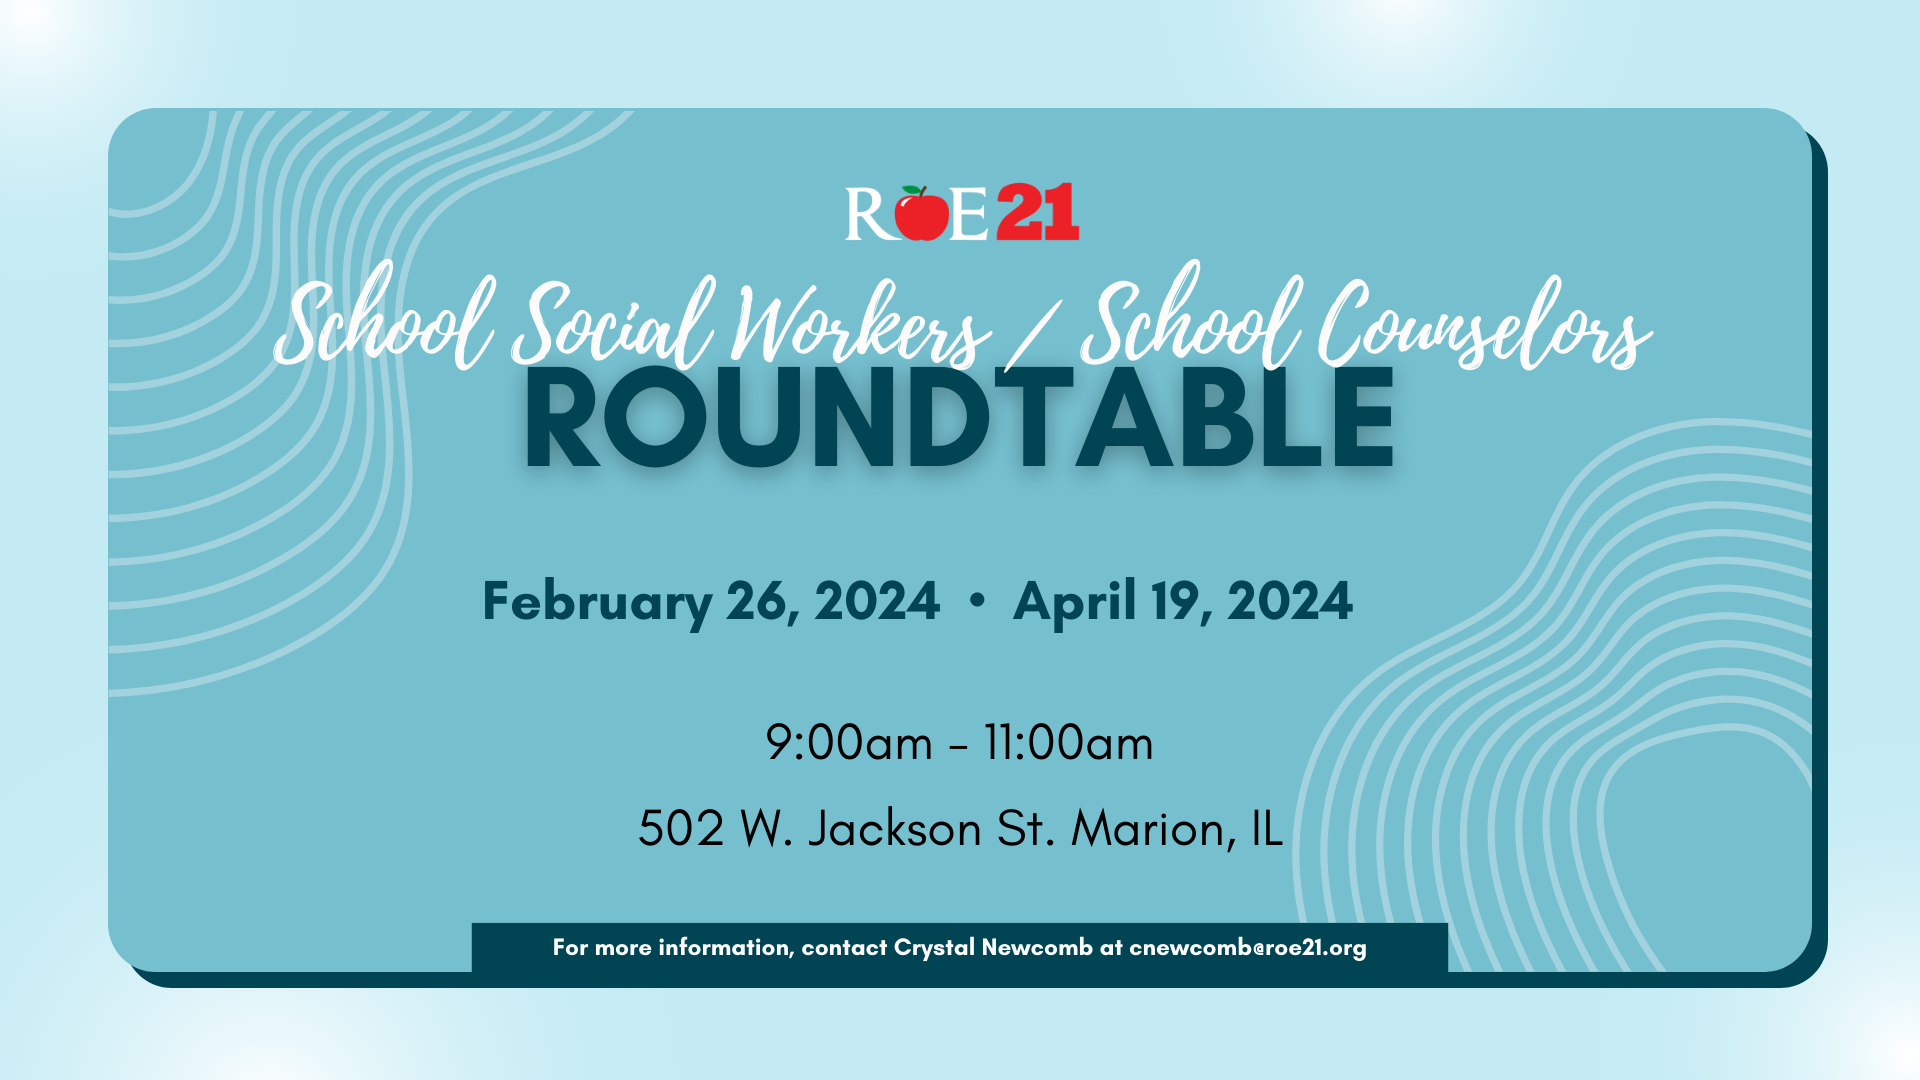 School Social Worker and Counselor Roundtable Flyer